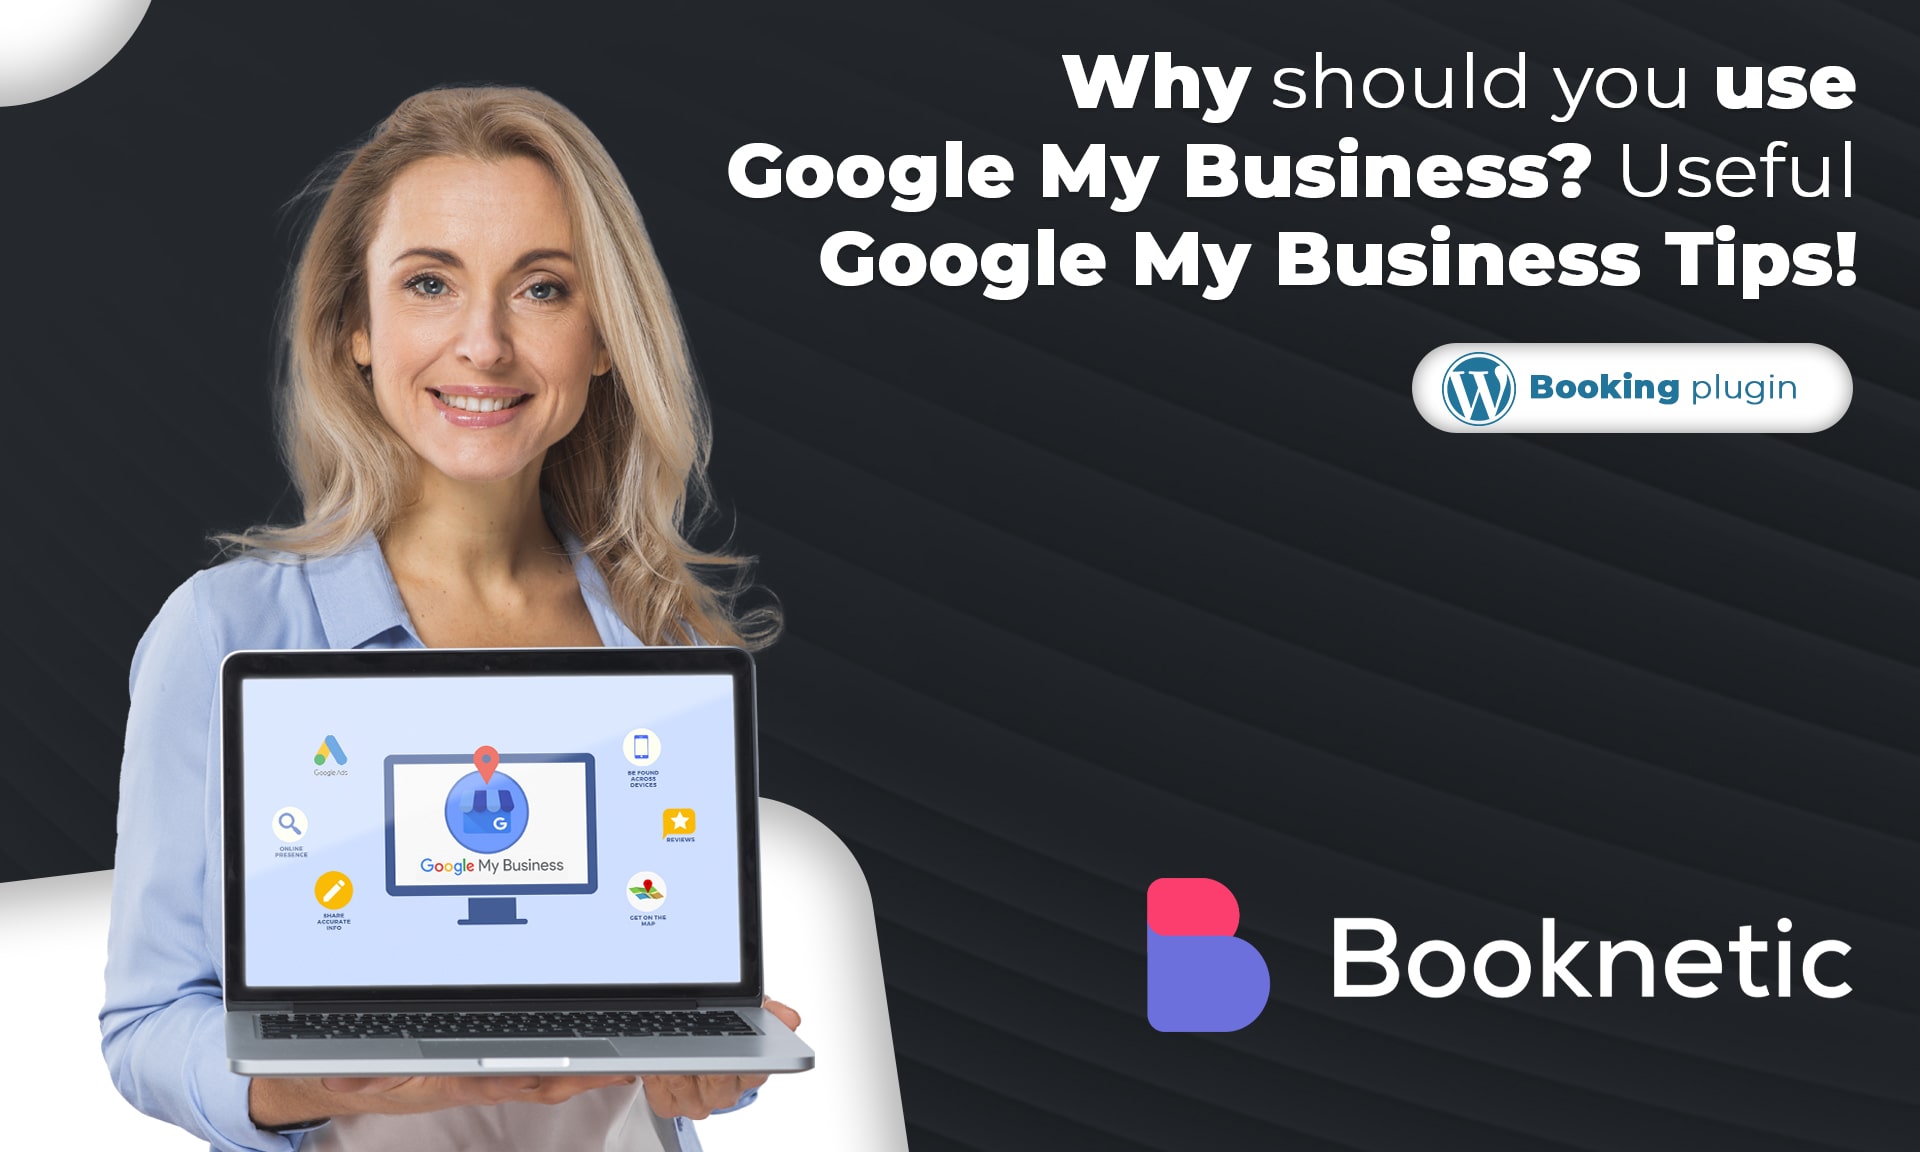 Why Should You Use Google My Business? Useful Google My Business Tips